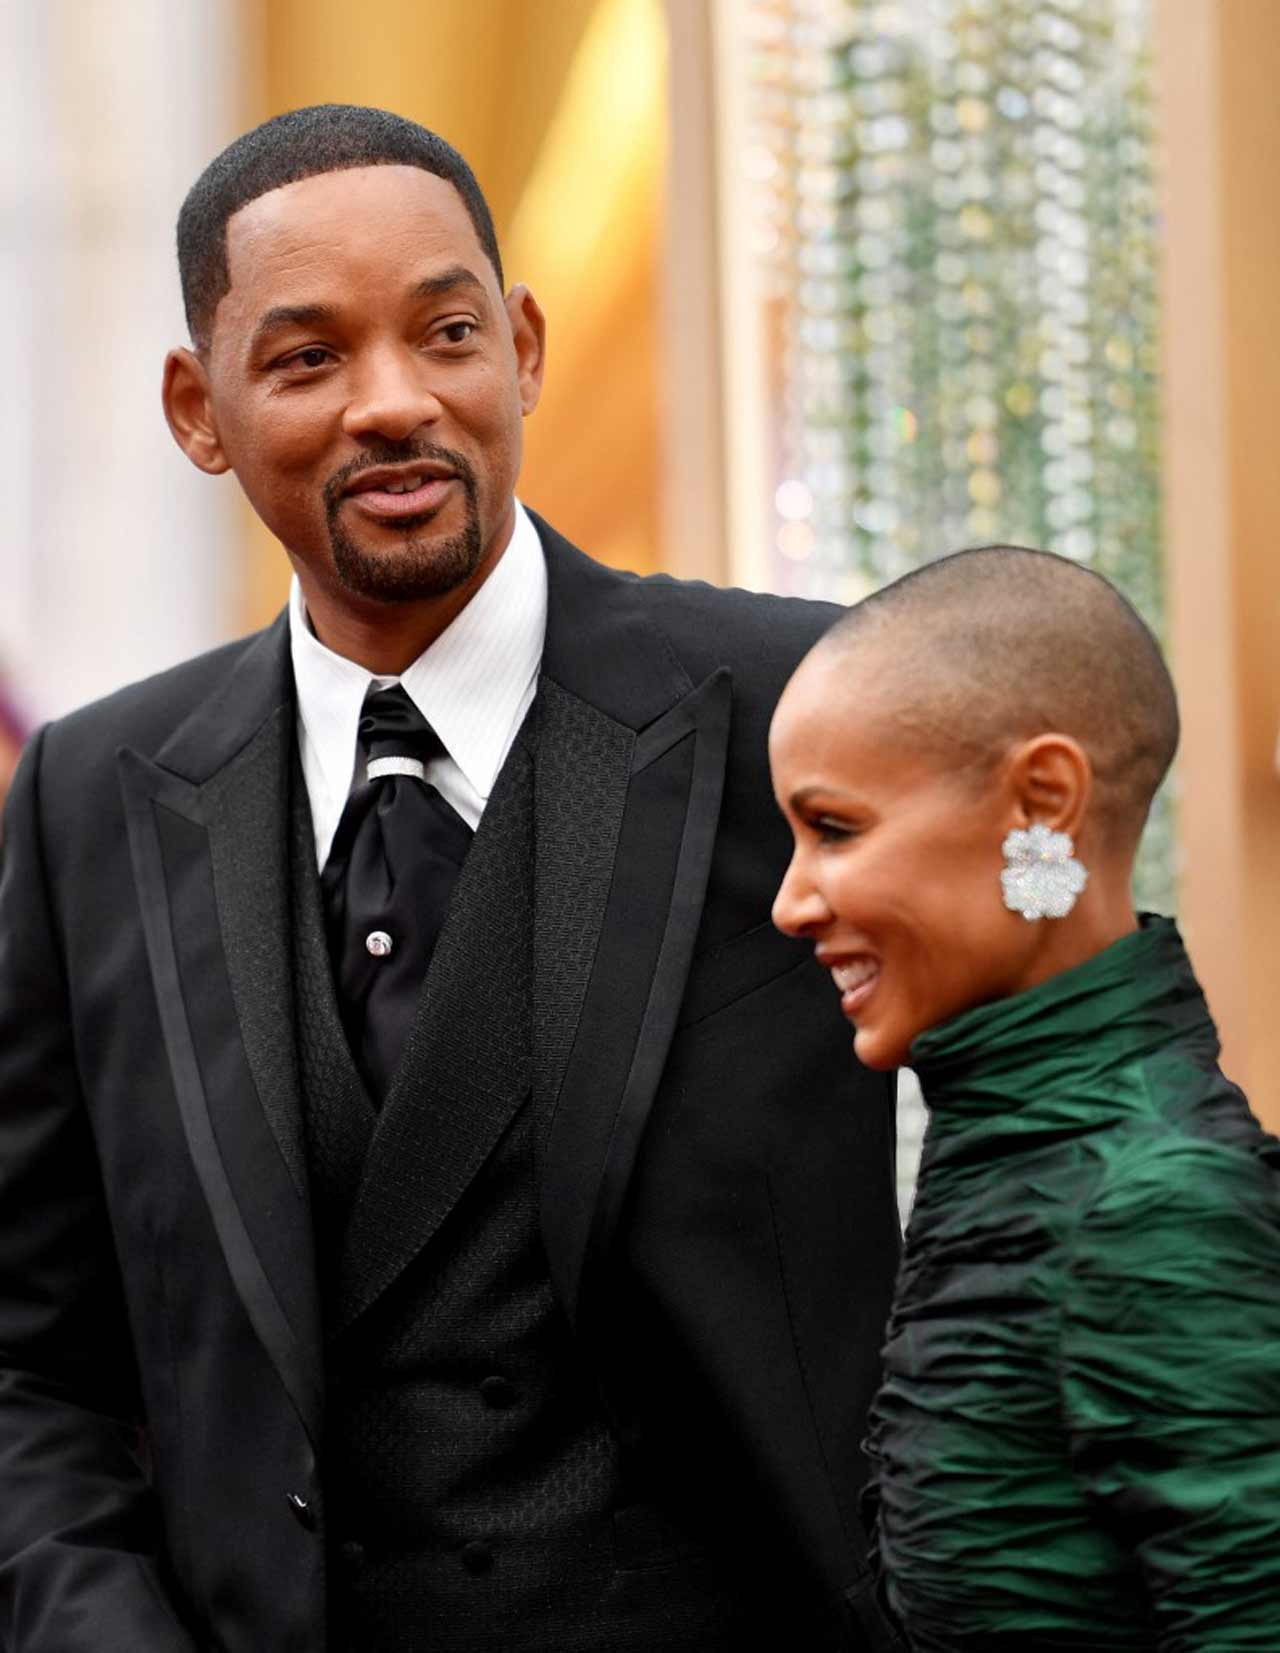 Will Smith apologises for slapping Chris Rock
After winning his first Oscar, American actor Will Smith apologised to the Academy for slapping comedian Chris Rock earlier in the ceremony after getting miffed at a joke directed towards his wife -- Jada Pinkett Smith. As per Variety, Rock appeared on stage to present the Oscar for documentary feature and he then made a joke about Jada-Pinkett being in 'G.I. Jane' because of her shaved bald head. Read the full story here.